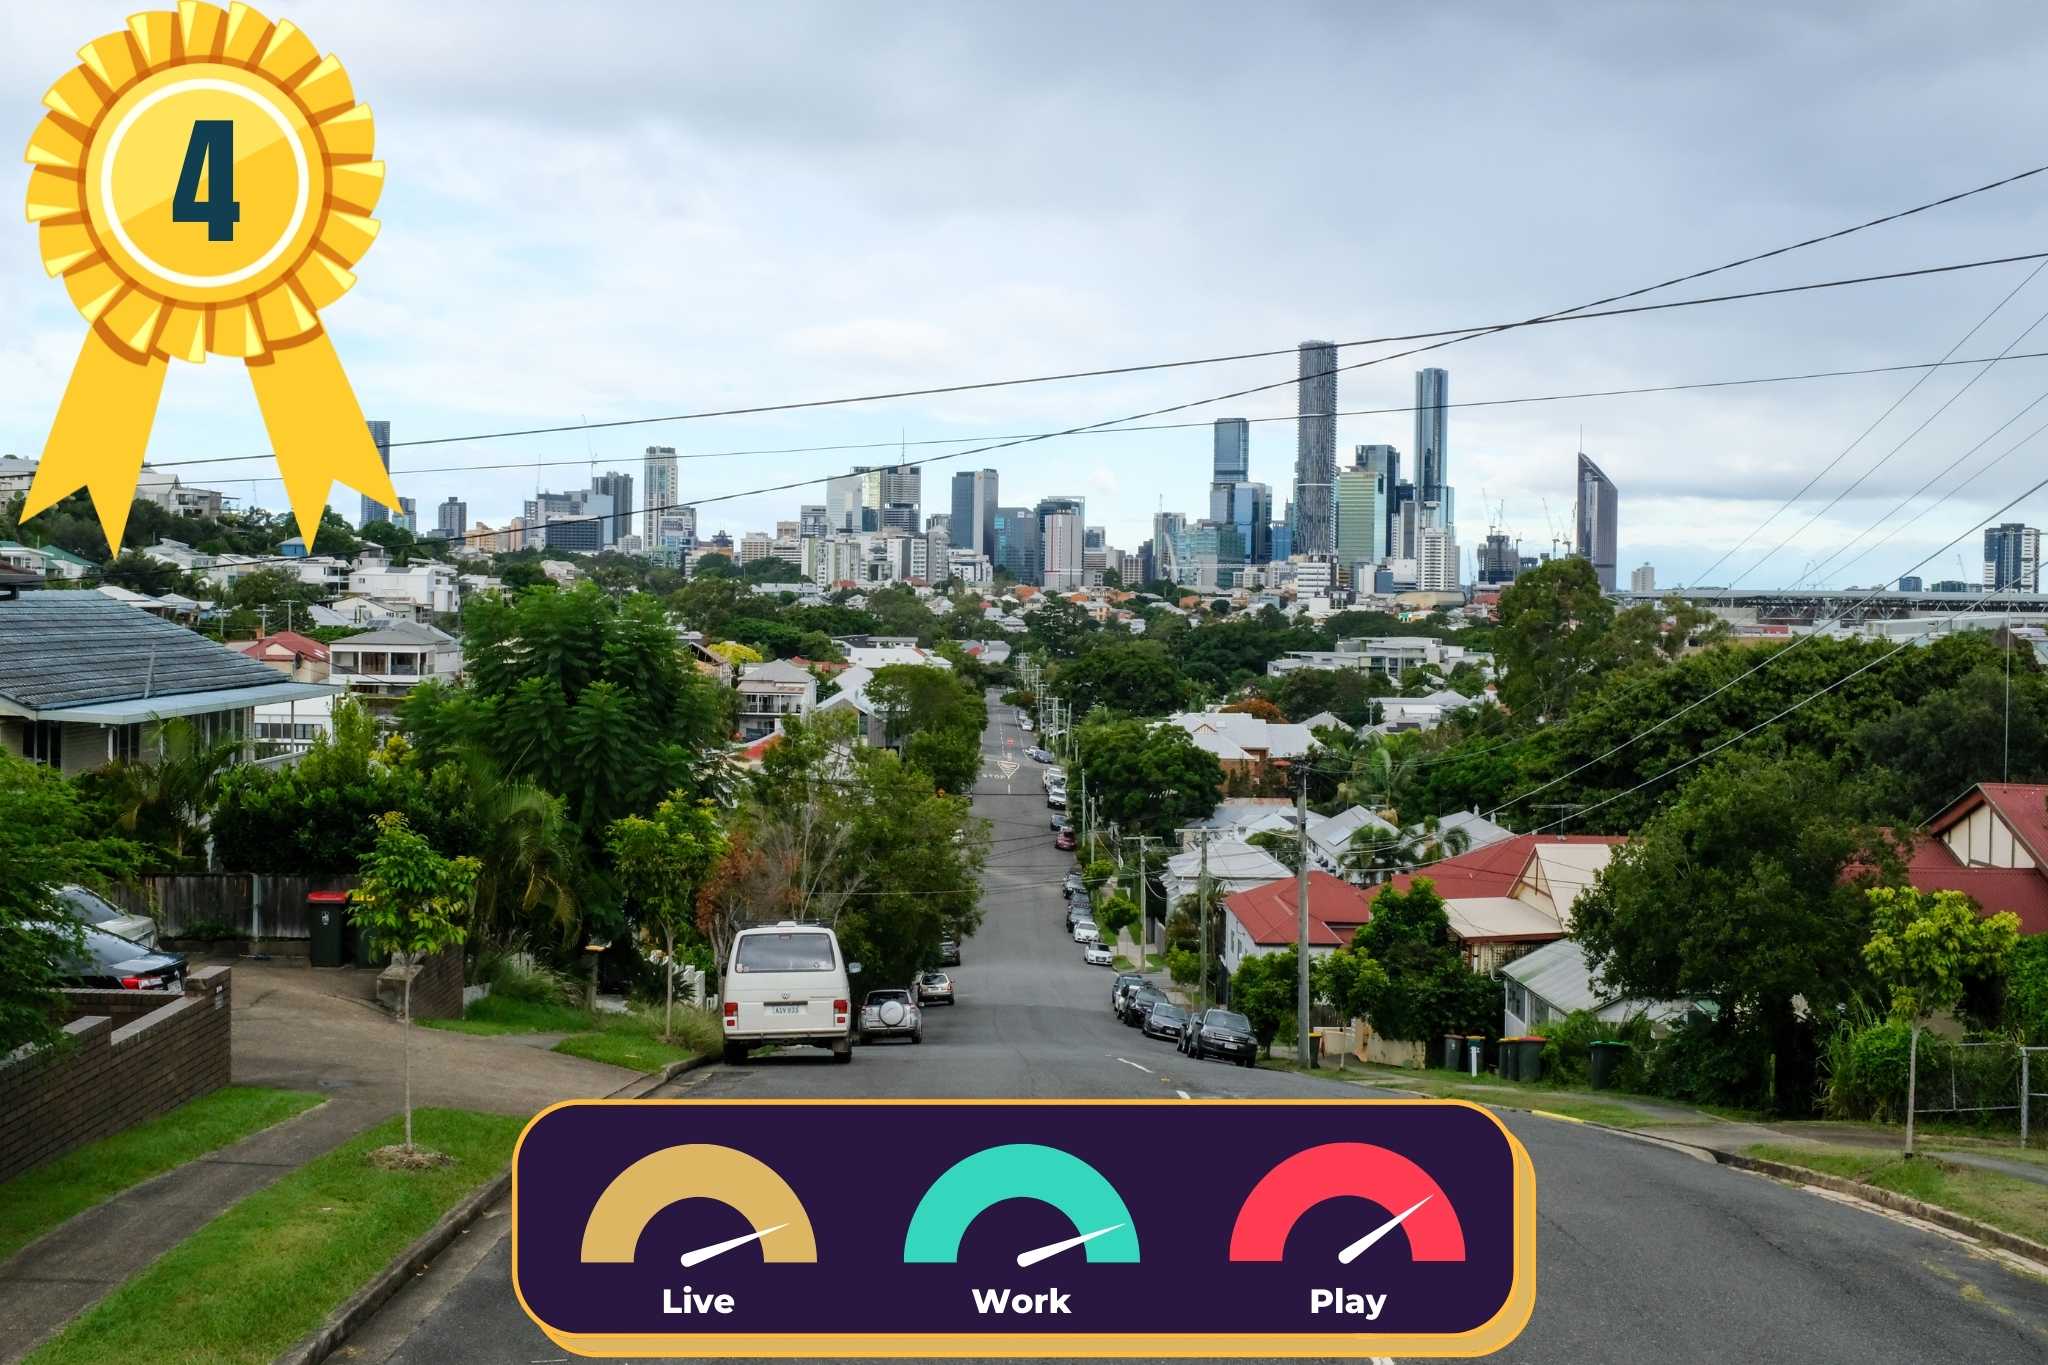 Paddington is Brisbane's fourth best suburb to live in